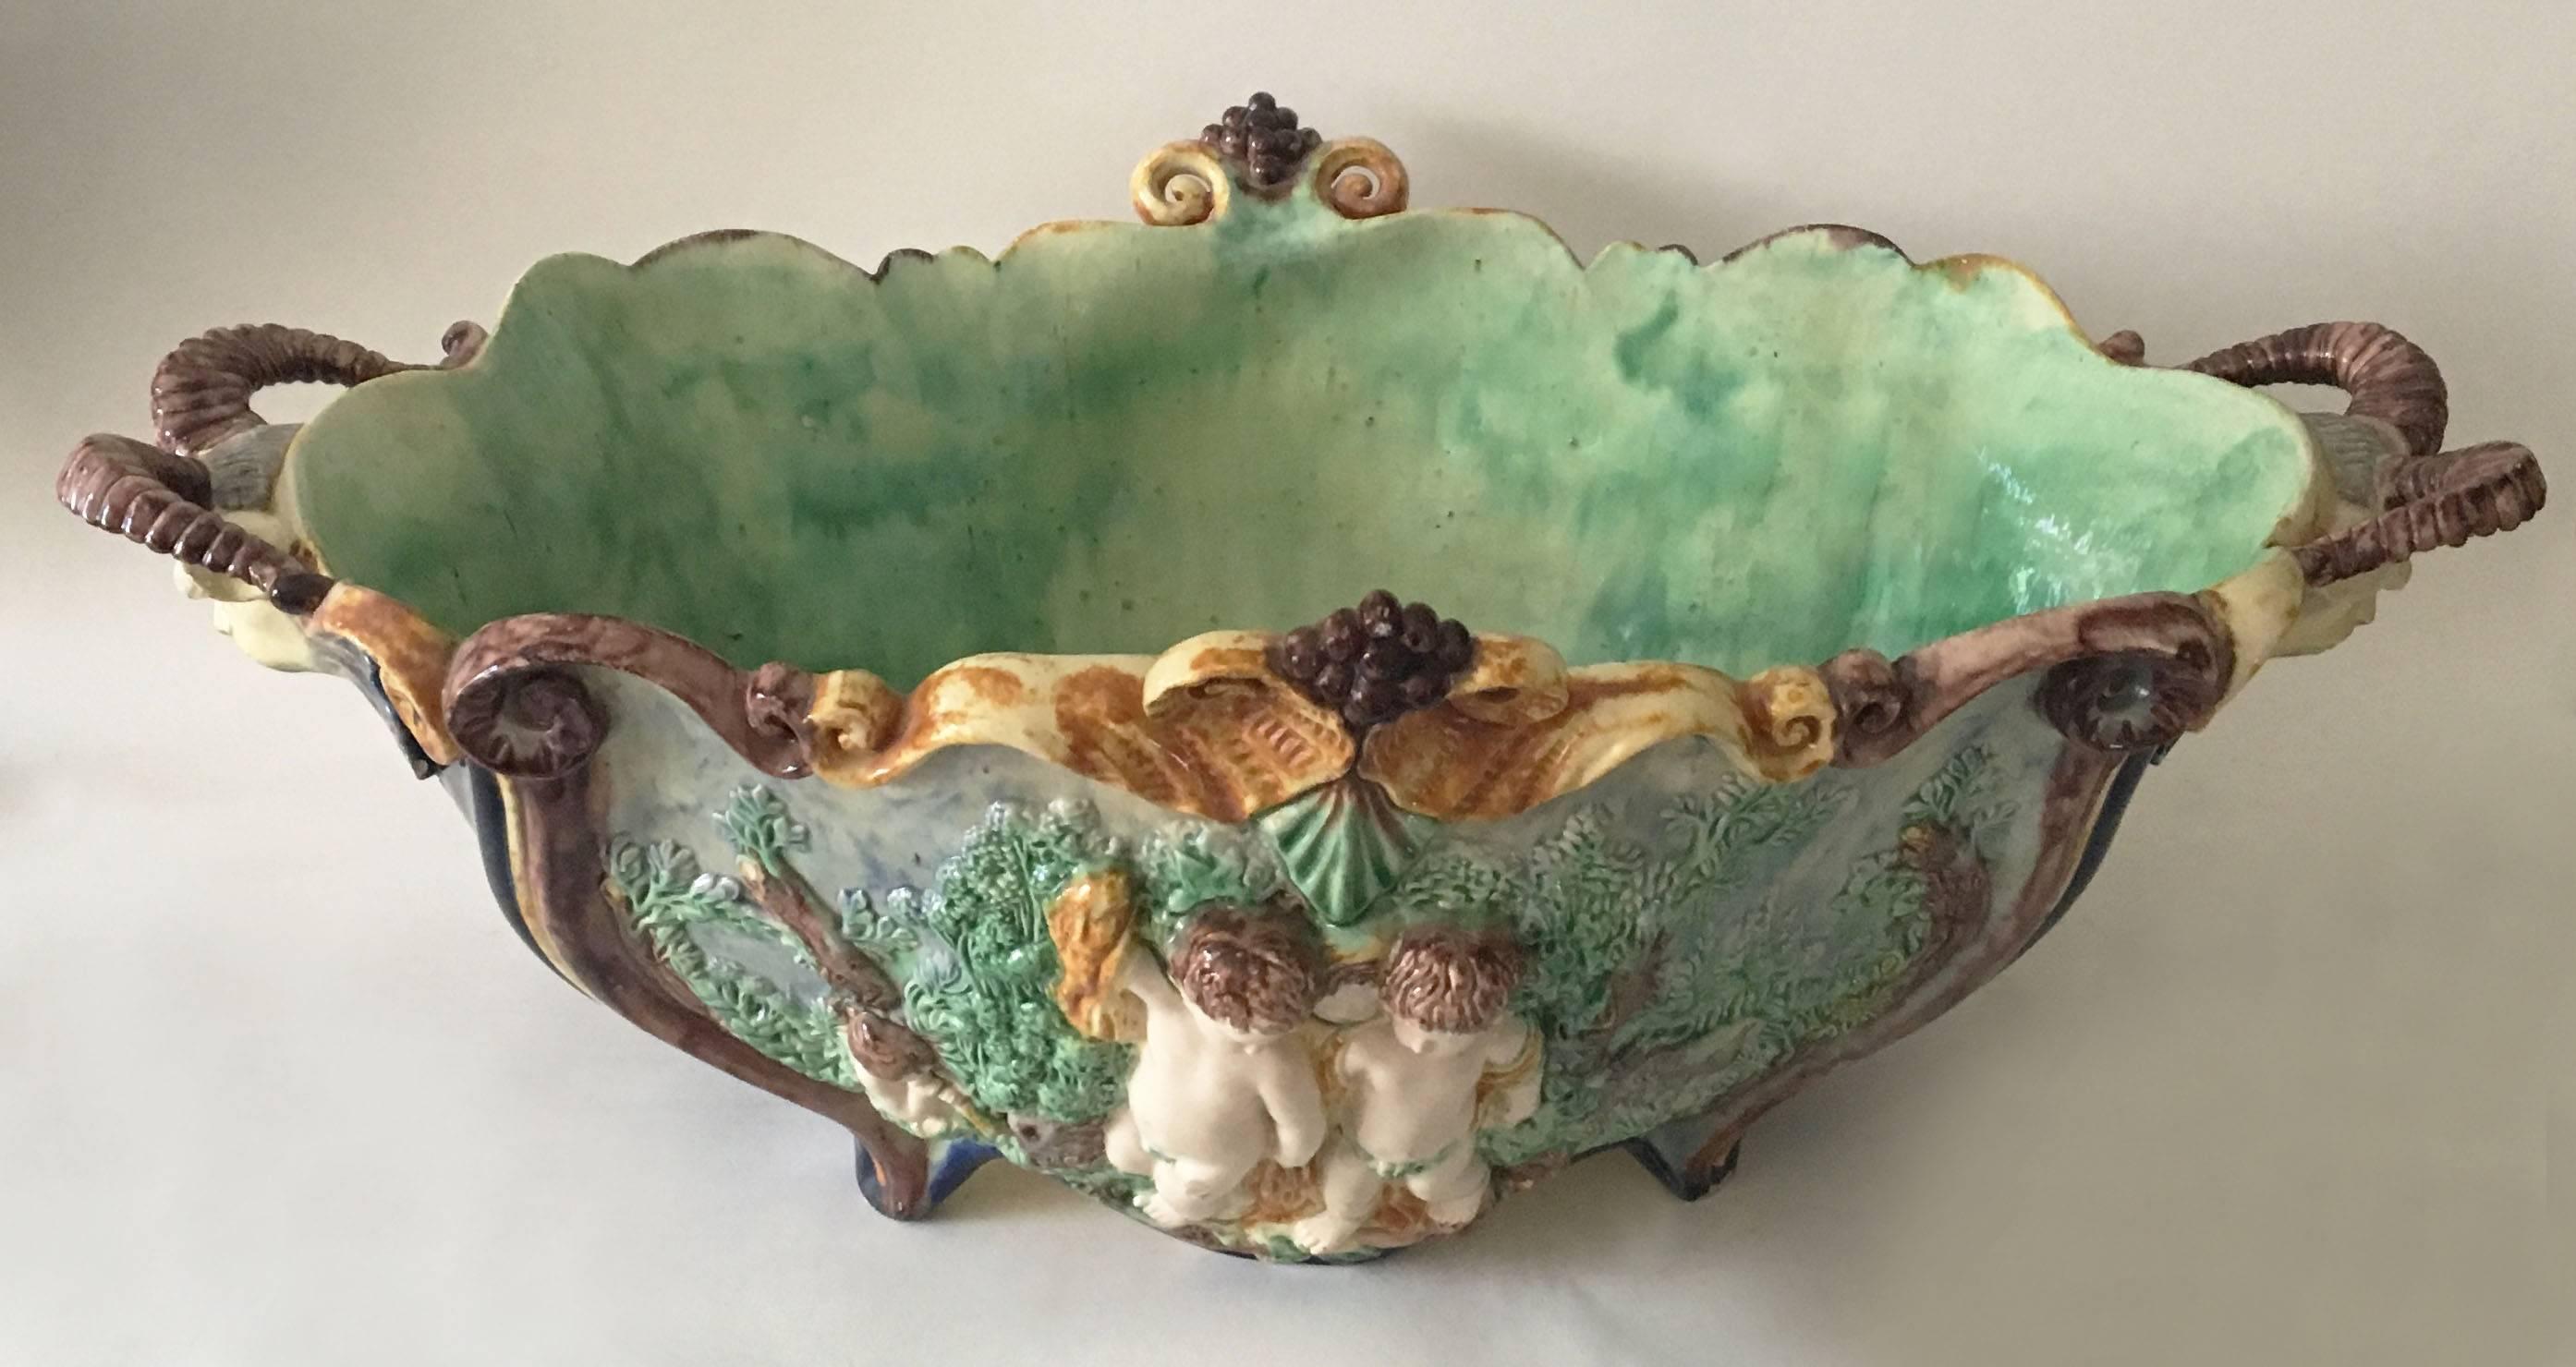 Oversize Palissy jardinière inspired by the Renaissance attributed to Thomas Sergent, circa 1880.
Fauns heads handles.
The School of Paris was composed by makers as Victor Barbizet, Francois Maurice, Thomas Sergent, Georges Pull, it's a group of